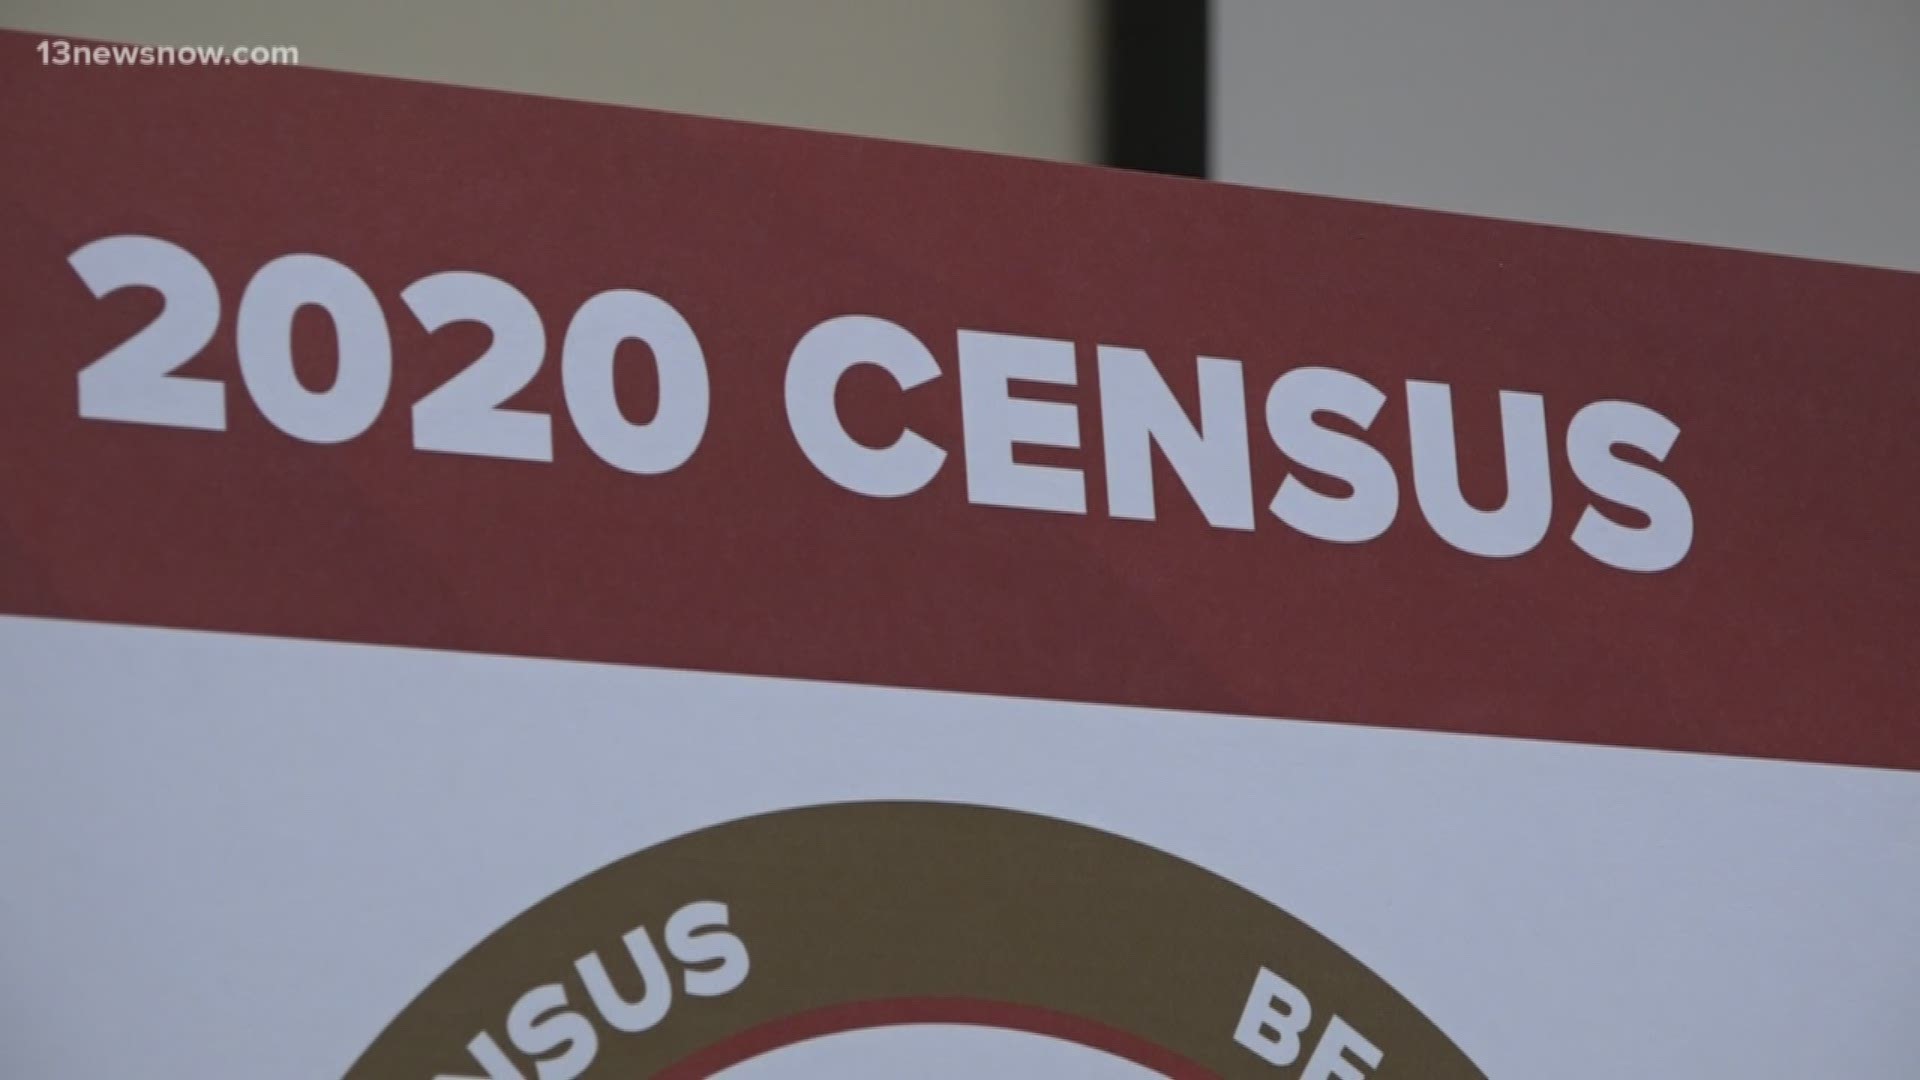 Governor Northam announced he would authorize spending $1.5 million to support the Virginia Complete Count Commission to maximize the number of Virginians who participate in the 2020 census. Federal funding accounts for billions of dollars in federal funding.